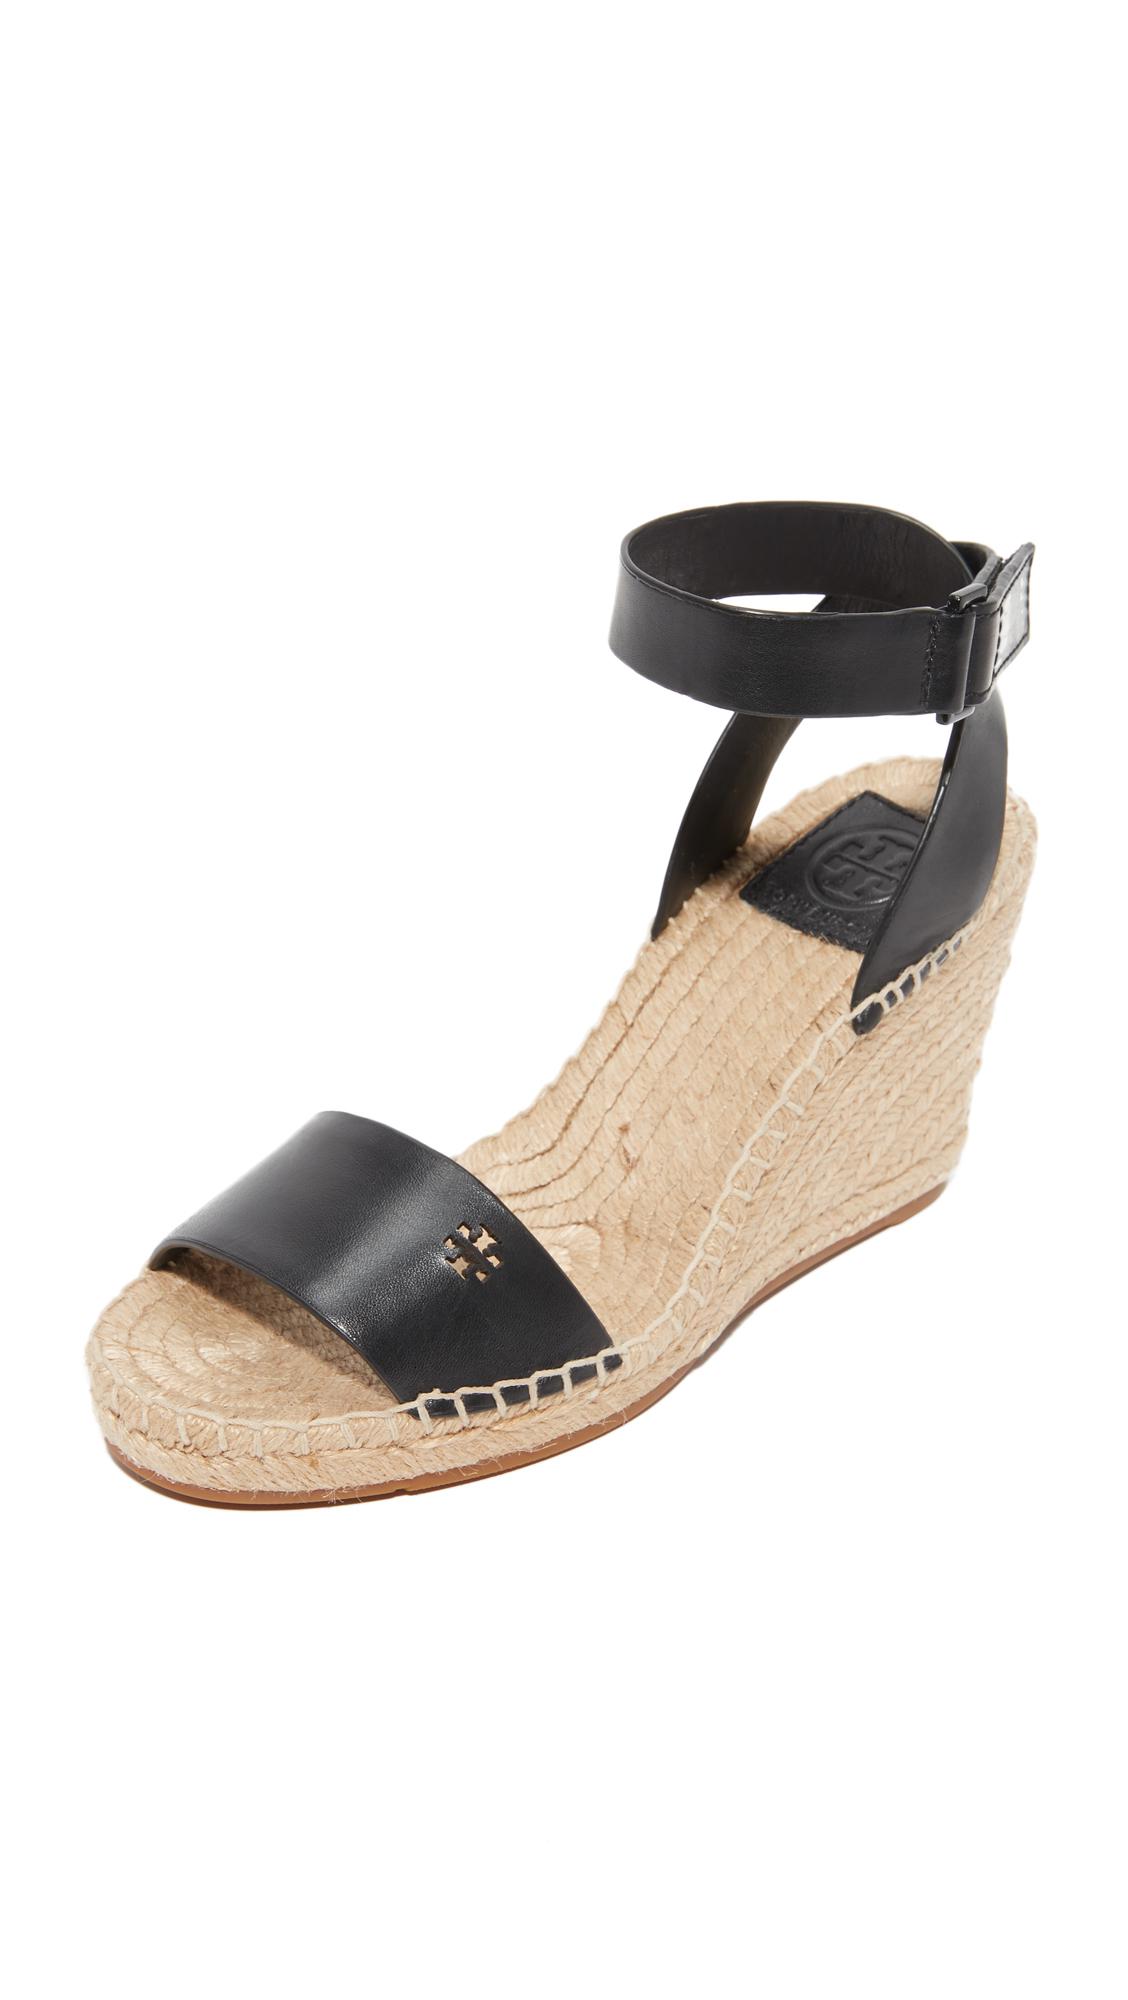 Tory Burch Wedge Espadrilles Discount Store, Save 67% 